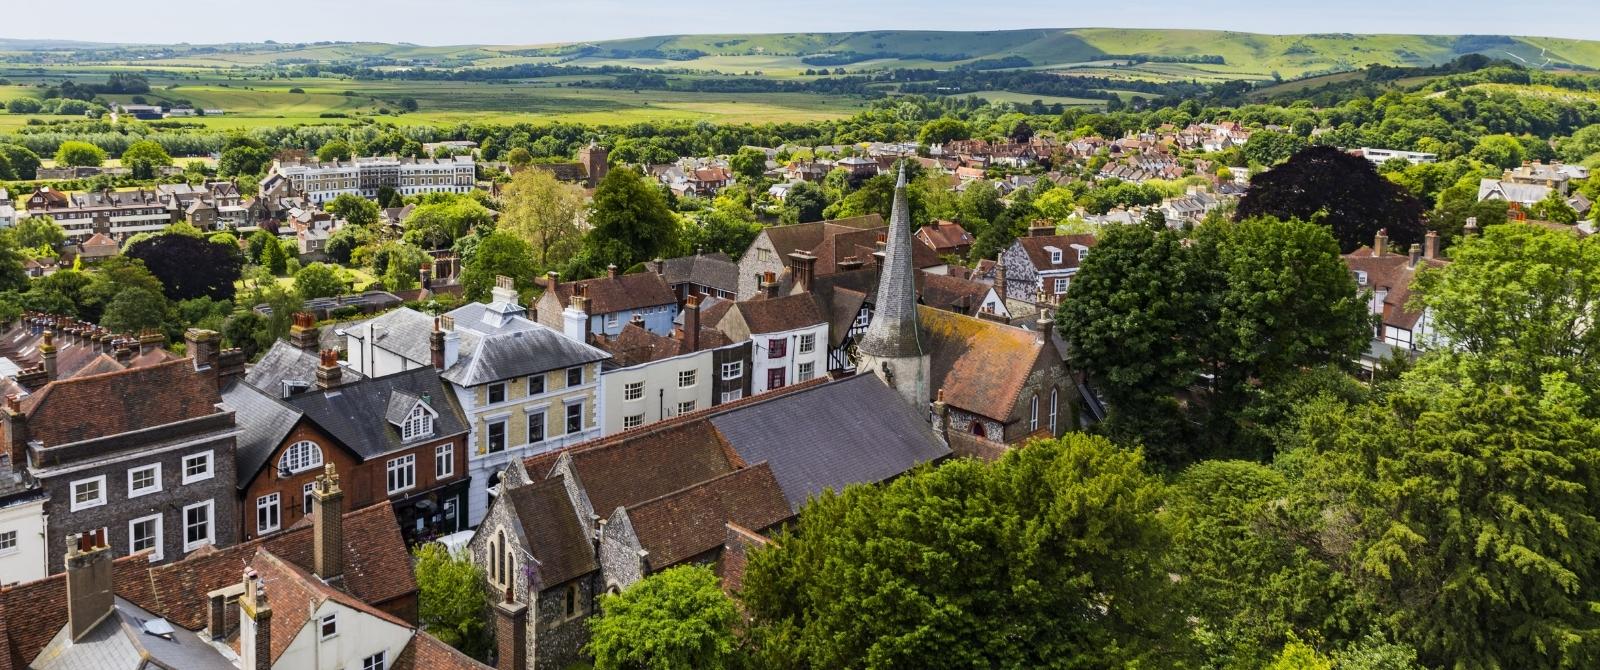 Discover the town of Lewes 